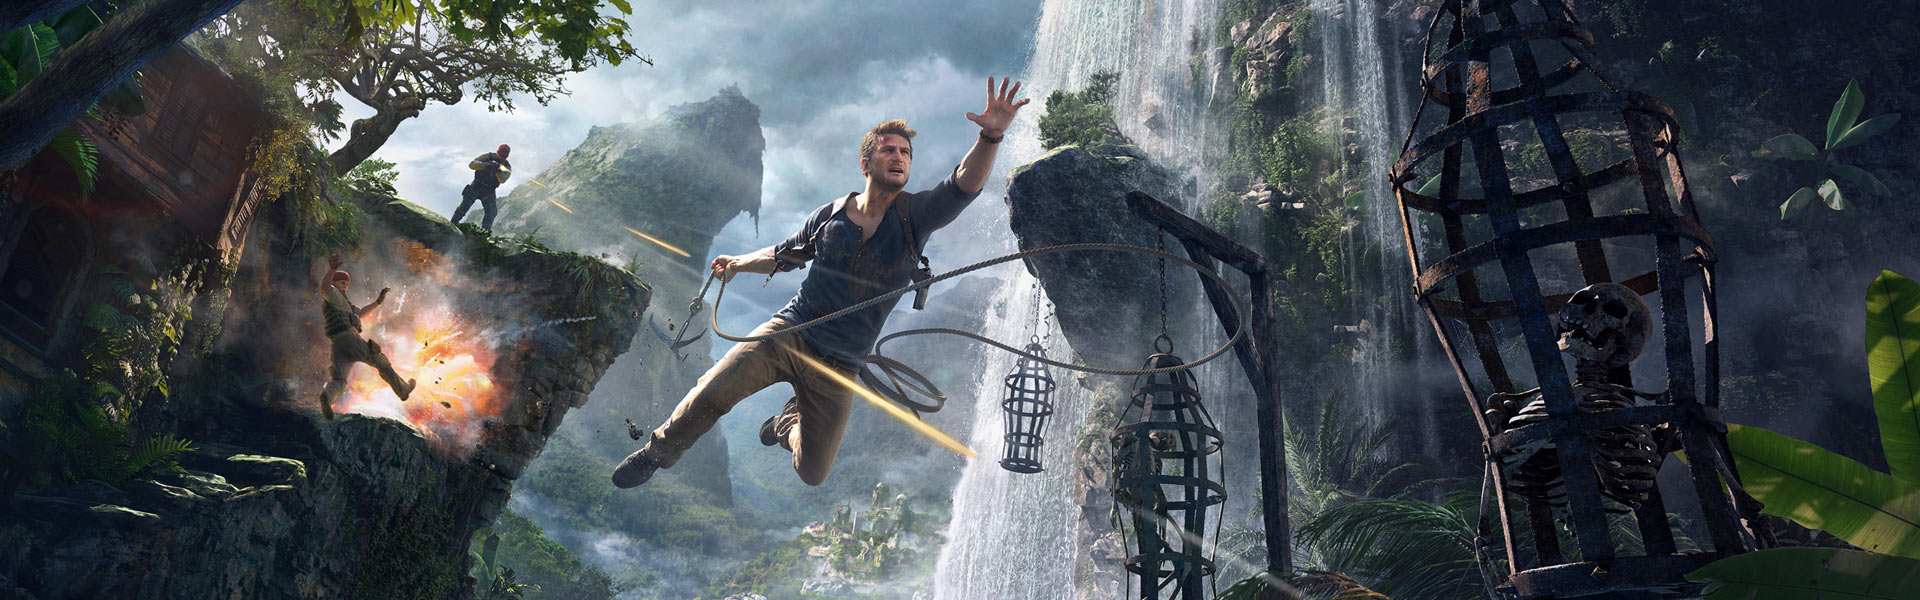 uncharted-4-a-thiefs-end-banner